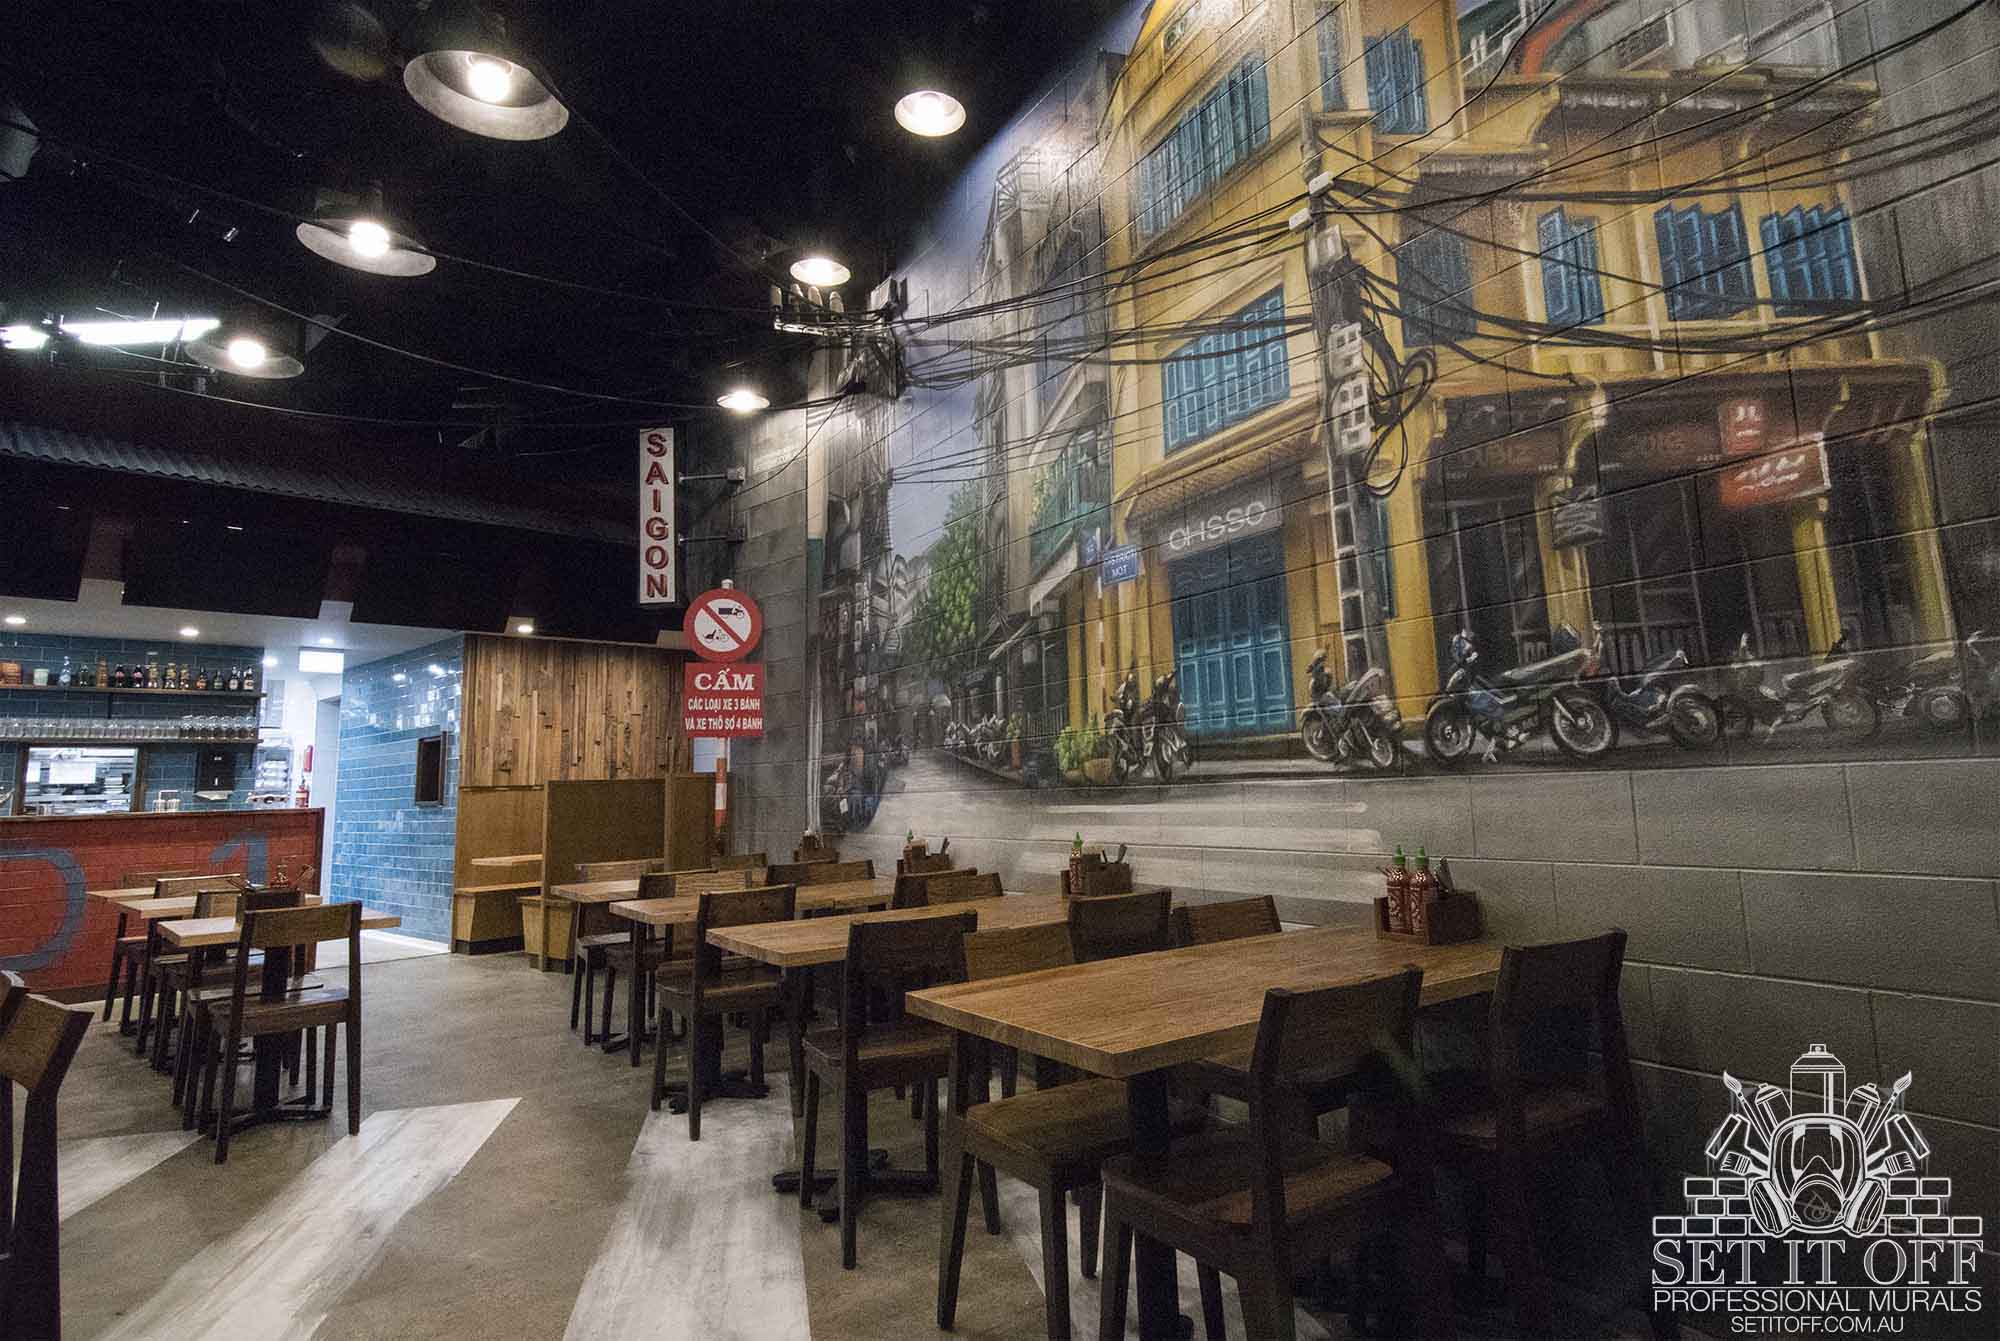 Continuous wall murals throughout a Vietnamese restaurant combined with other recycled materials and sculptures.